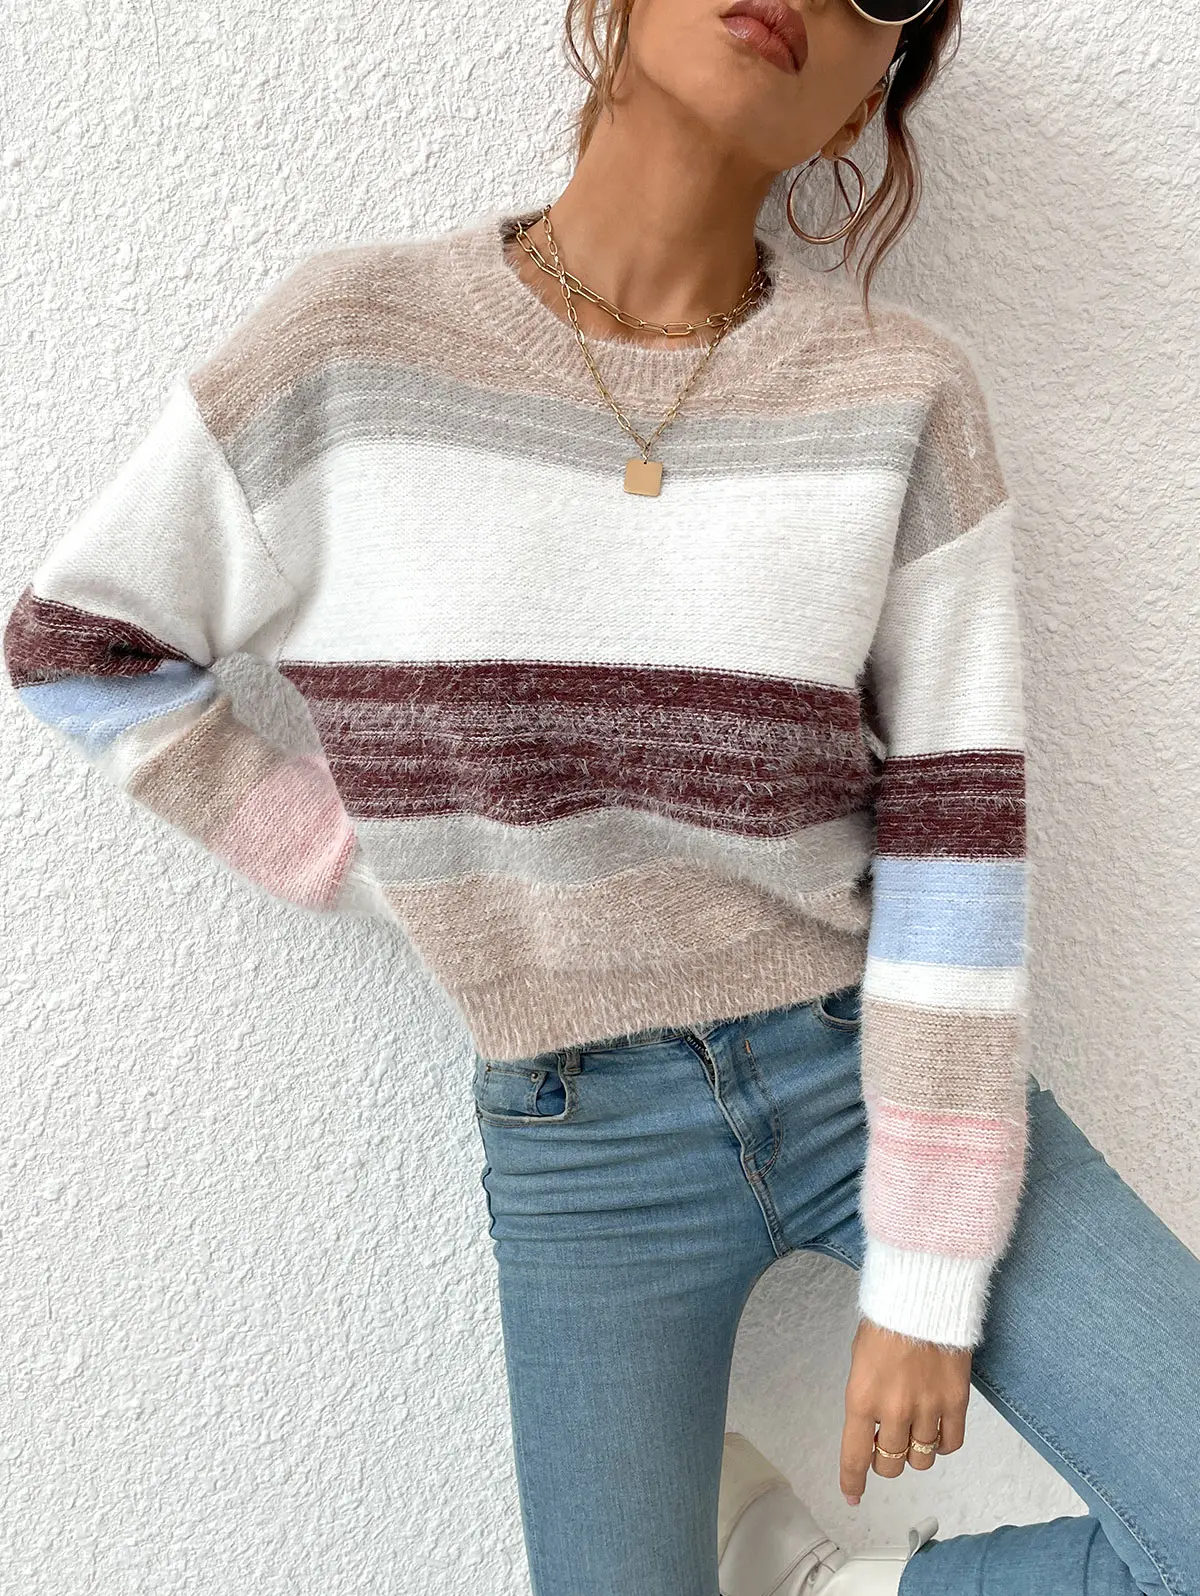 

ZAFUL Crew Neck Drop Shoulder Colorblock Sweater Spring Fall Winter Striped Knit Jumper Female Casual Top Long Sleeve Pullover